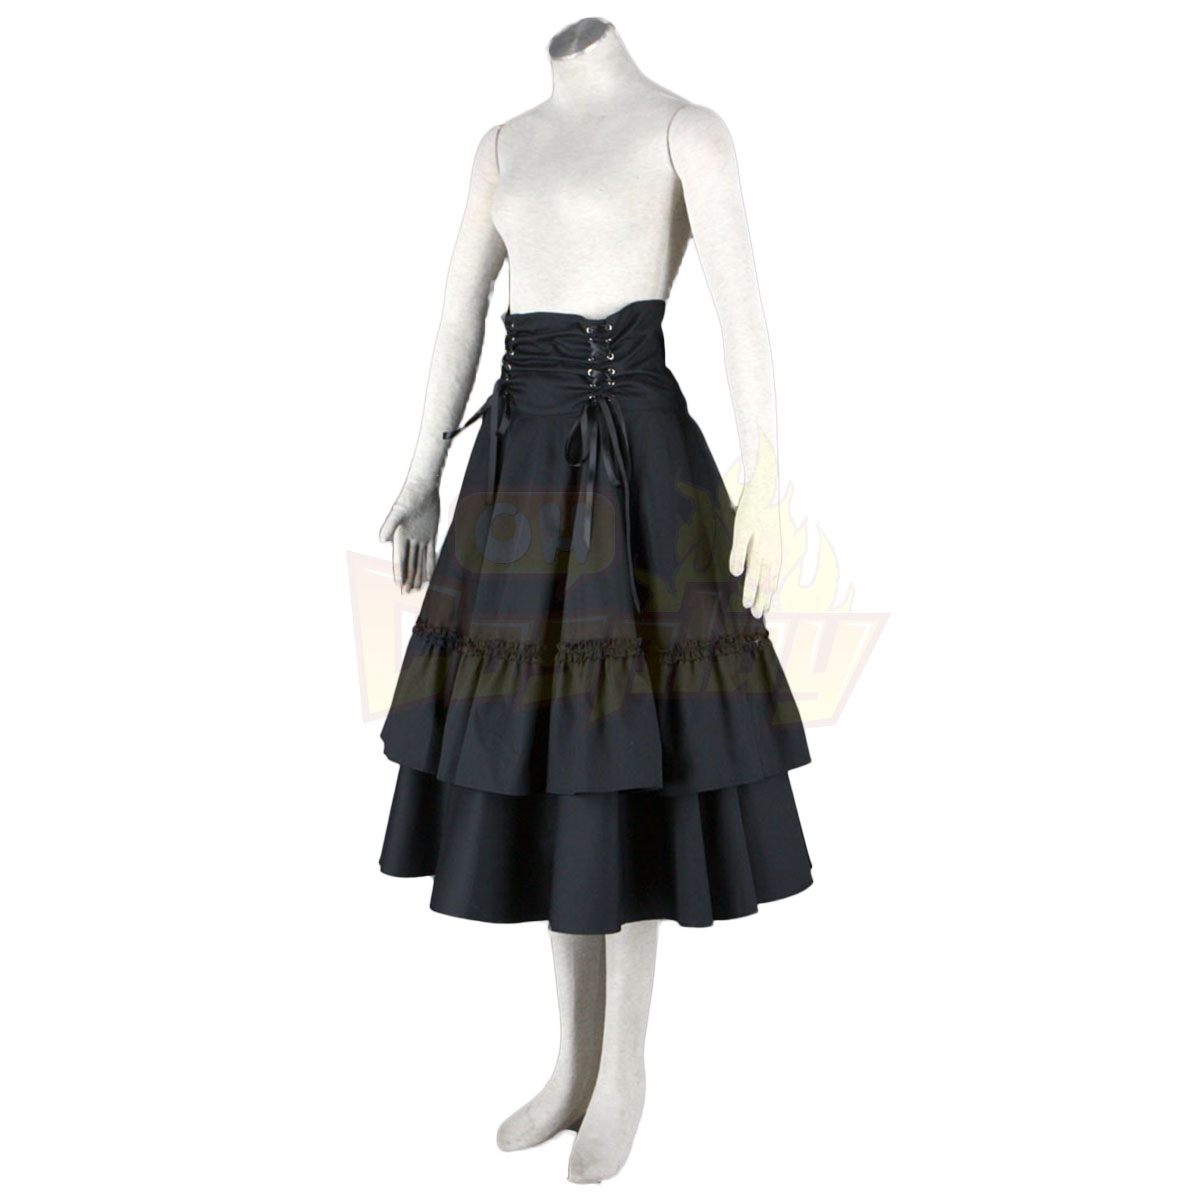 Deluxe Lolita Culture Girdle Black Bows Long Dresses Cosplay Costumes